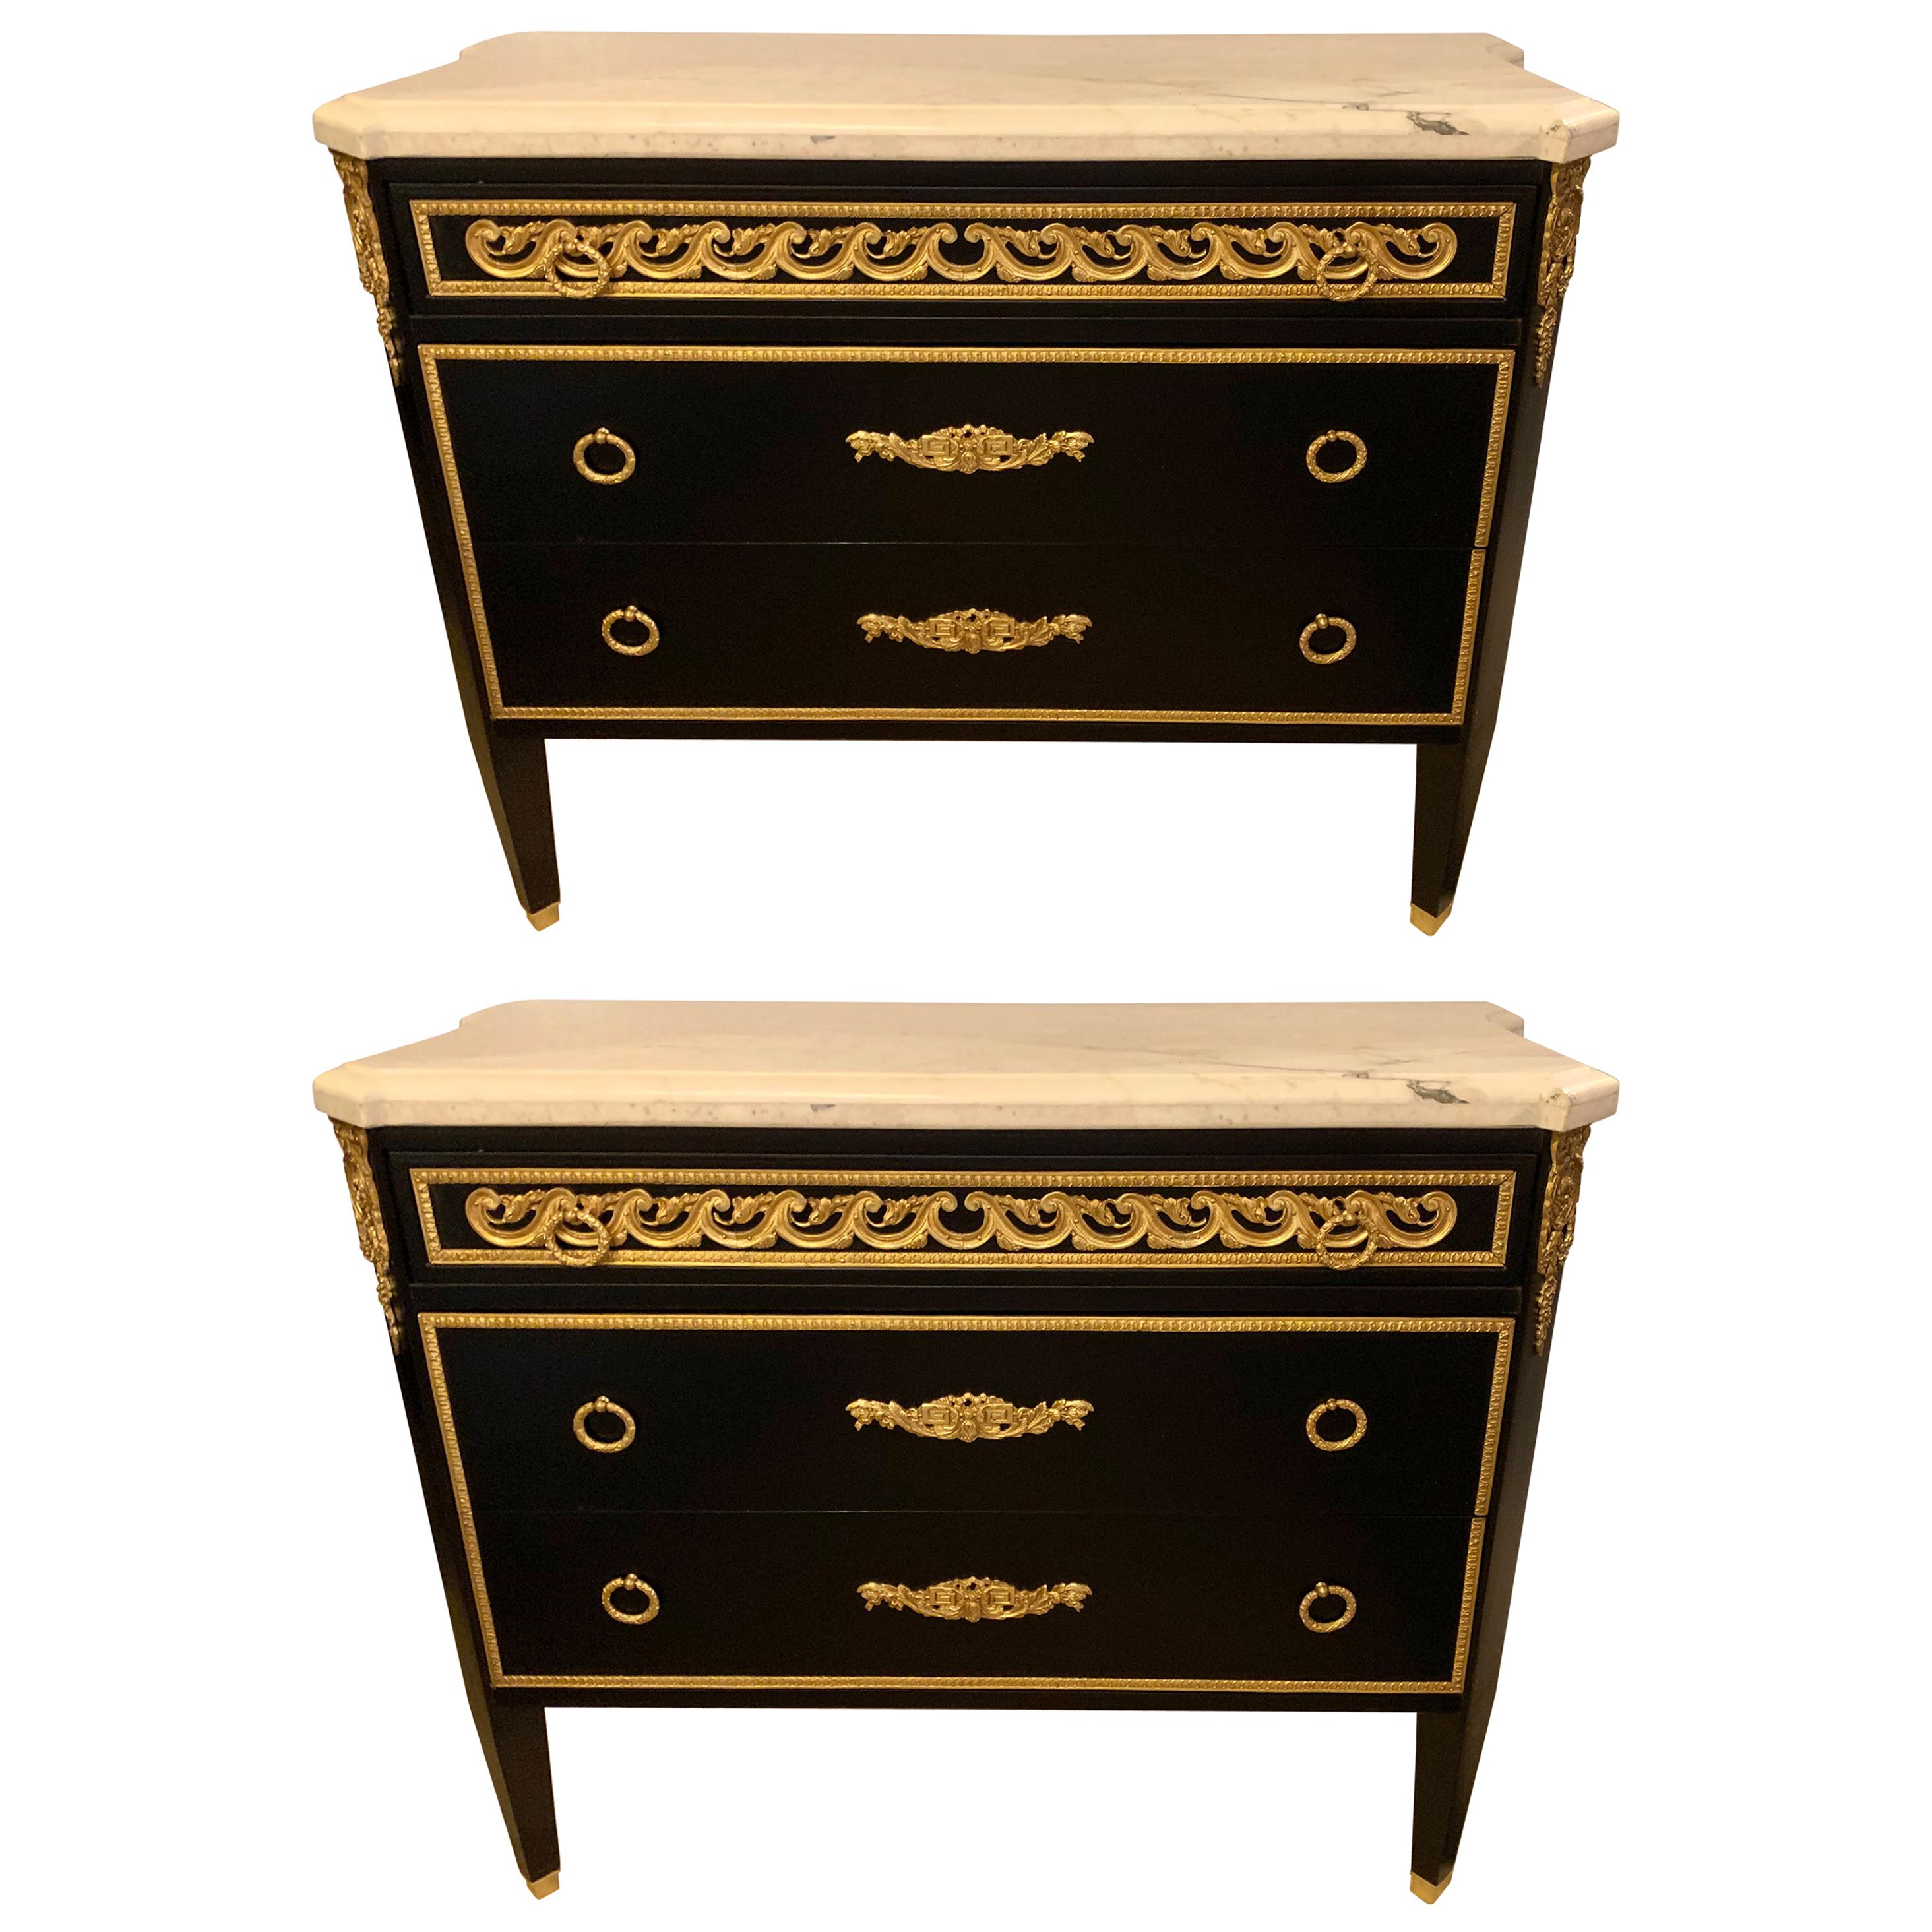 Hollywood Regency Maison Jansen Style Ebony Commodes, Cabinets or Nightstands